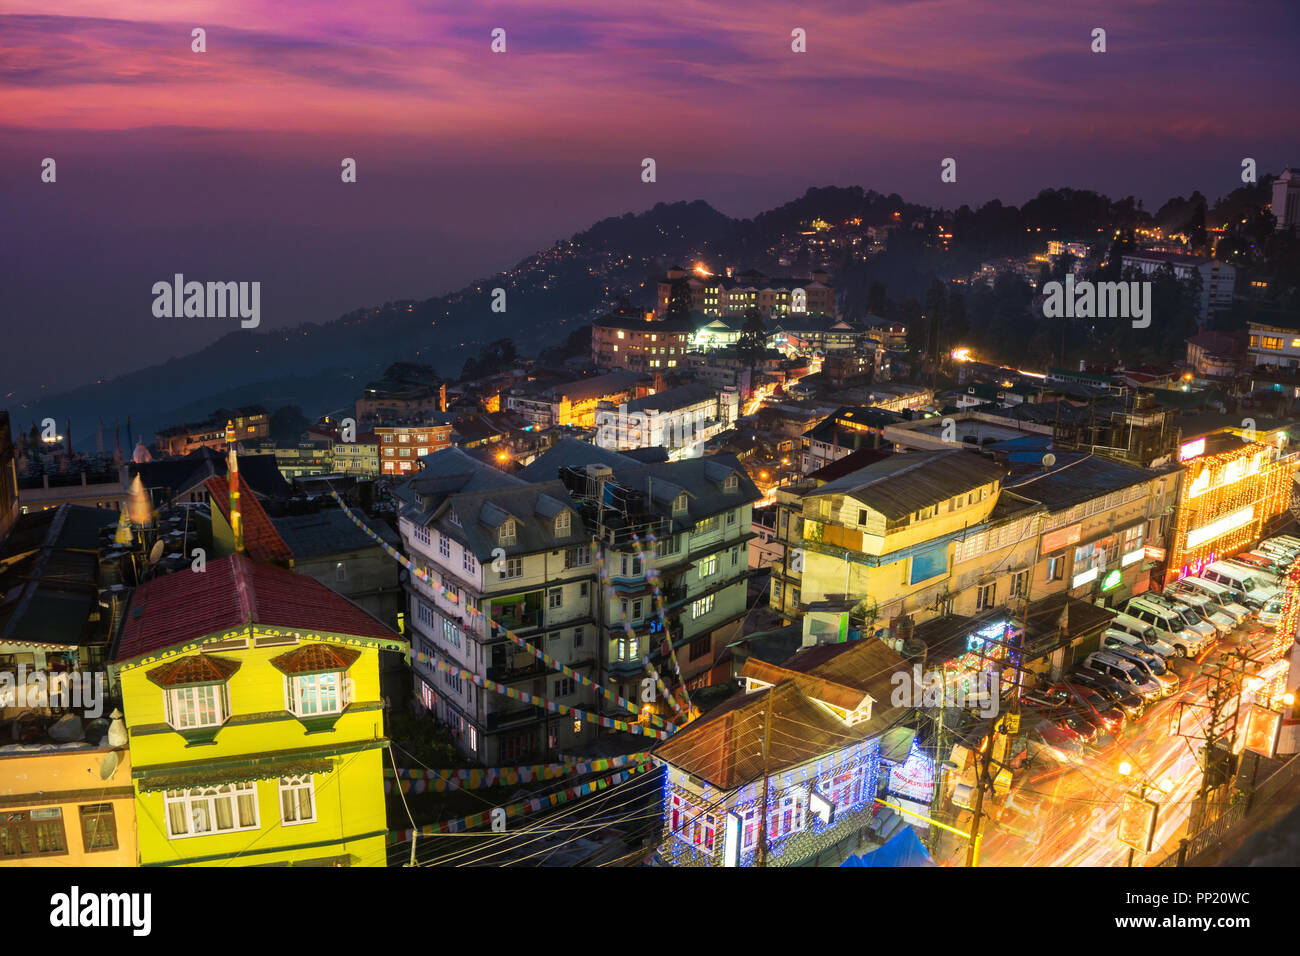 Darjeeling city view from high angle shot, West Bengal, India Stock Photo